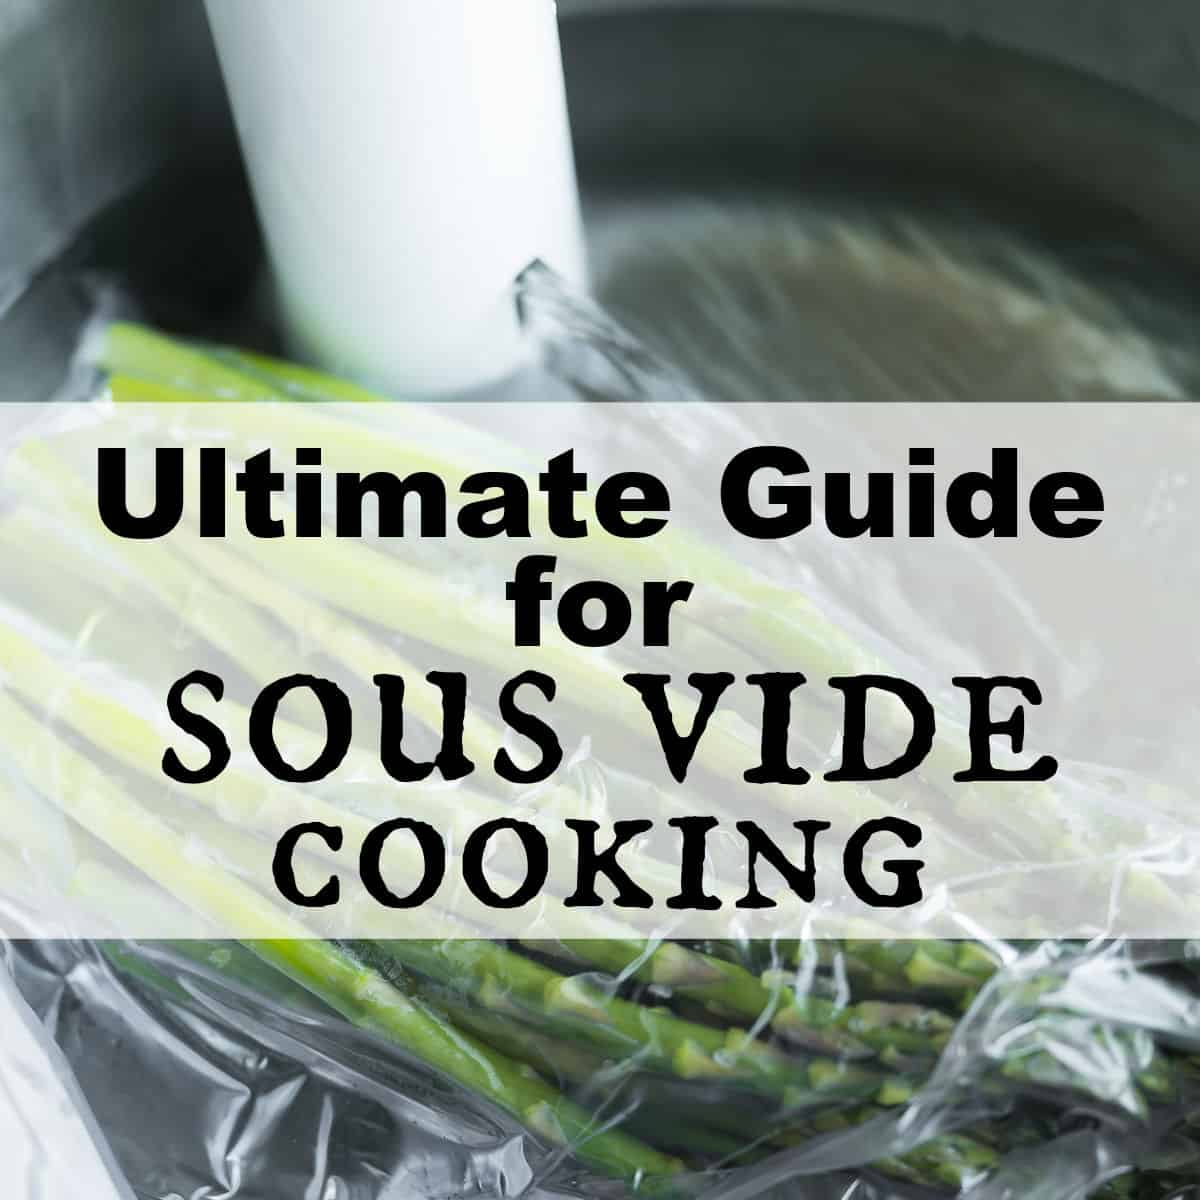 https://www.artfrommytable.com/wp-content/uploads/2022/04/Ultimate_guide_to_sous_vide_cooking_square.jpg